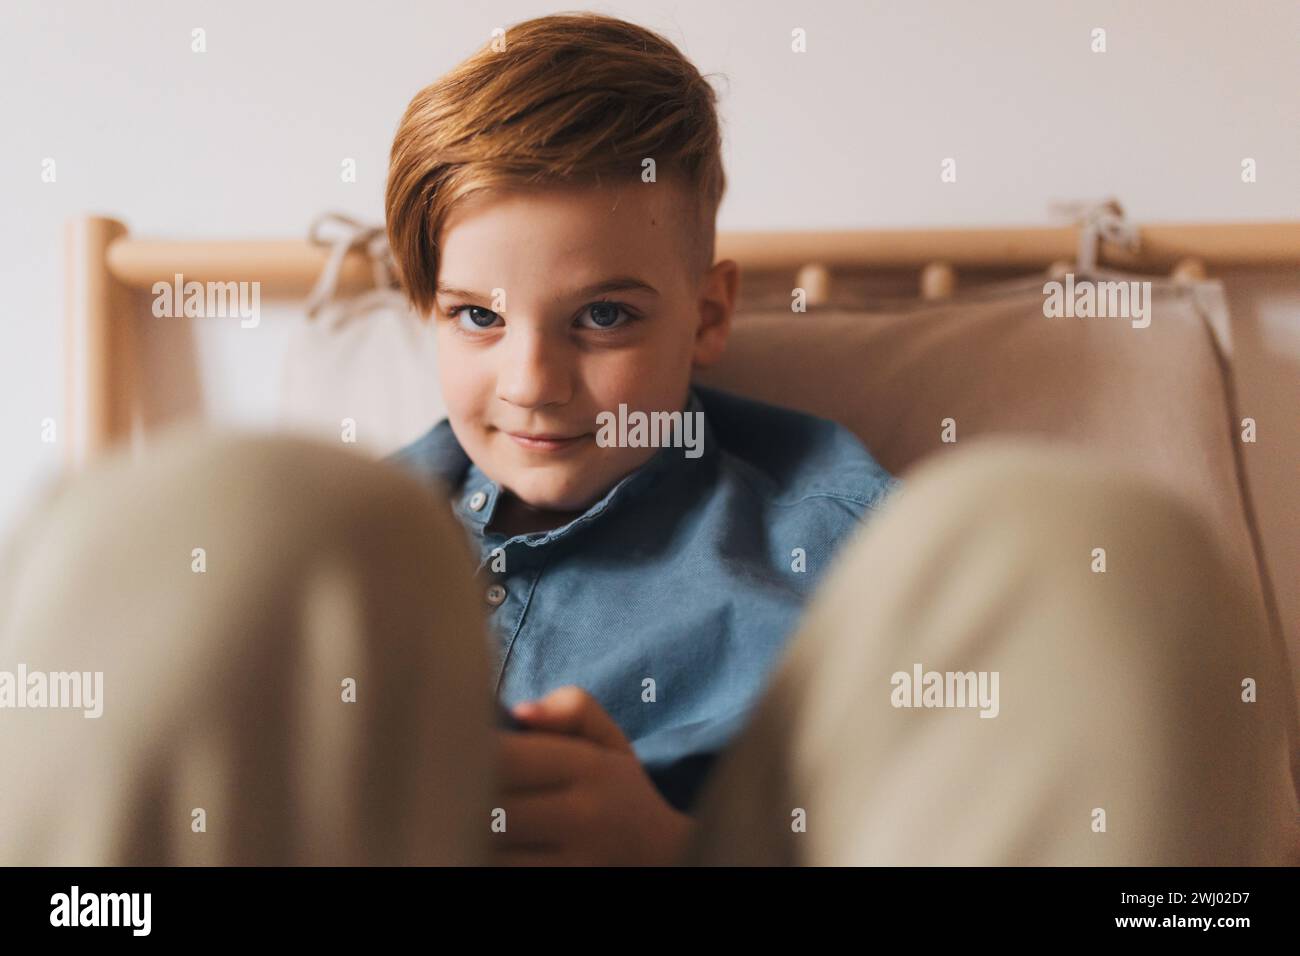 Portrait of young boy sitting on bed, looking at camera with soft smile. Handsome young boy. Stock Photo